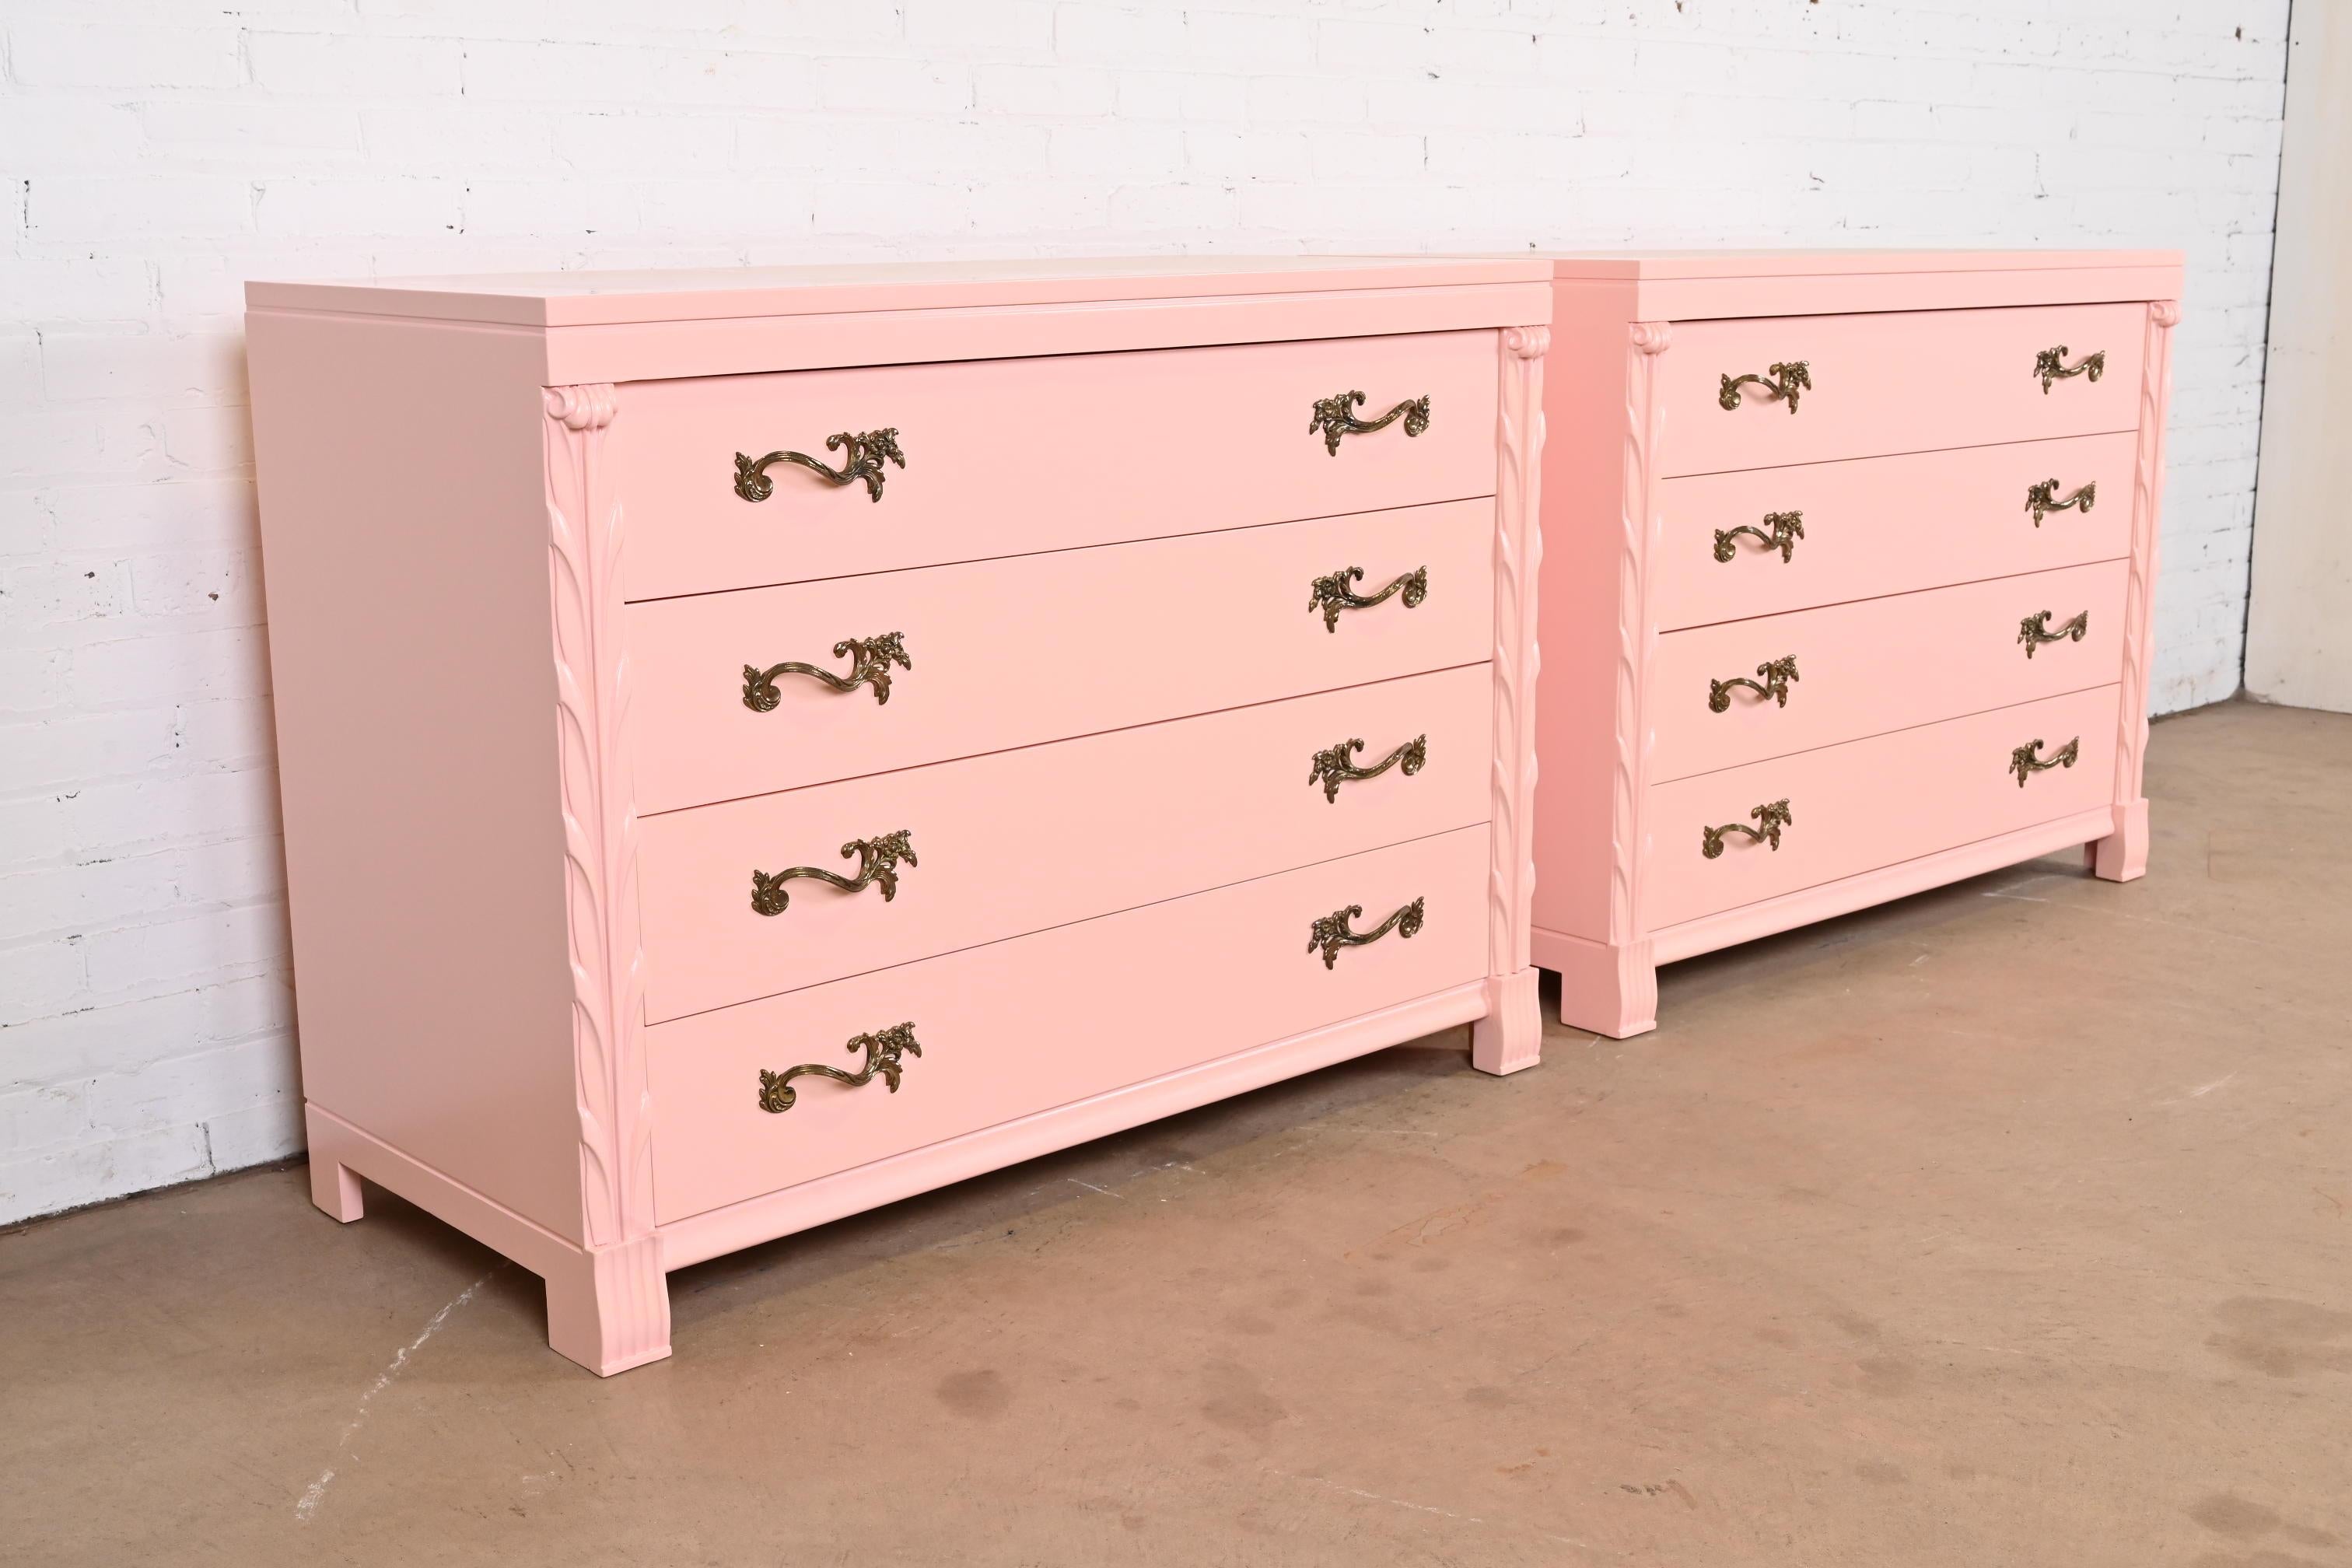 Mid-20th Century John Stuart French Regency Pink Lacquered Dresser Chests, Newly Refinished